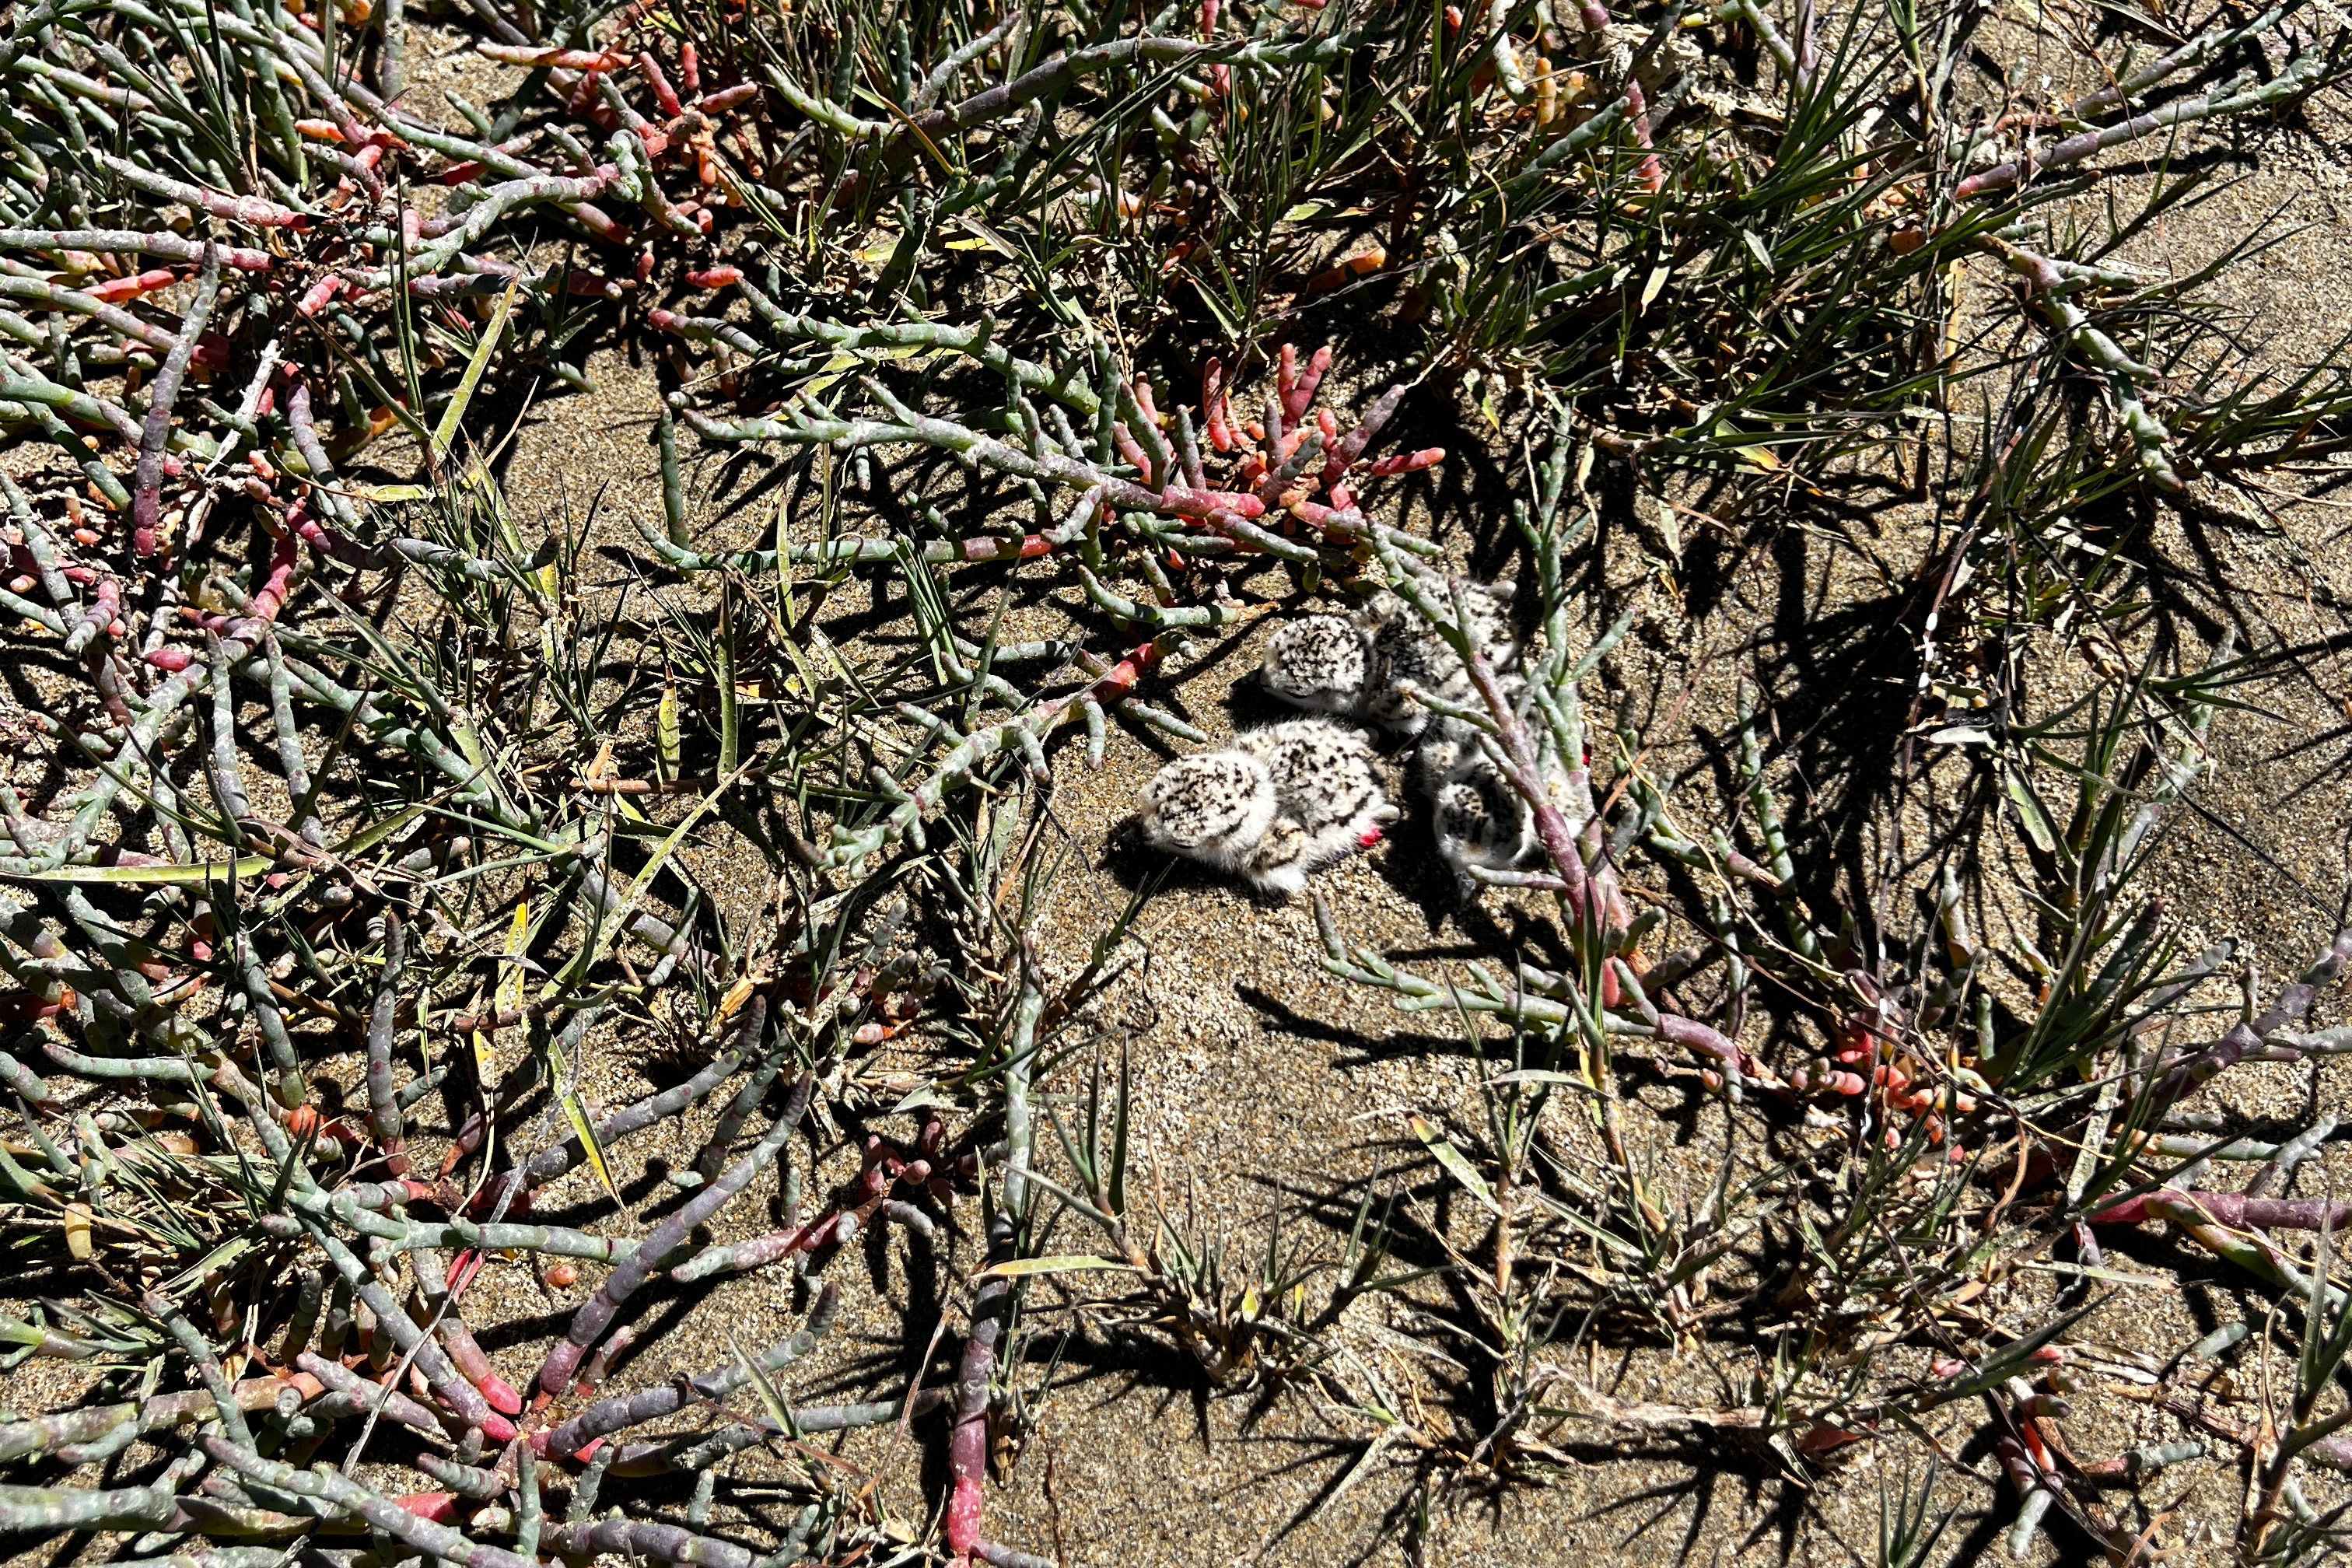 A photo of tree small black-speckled, beige-colored chicks sitting on sand among vine-like vegetation.